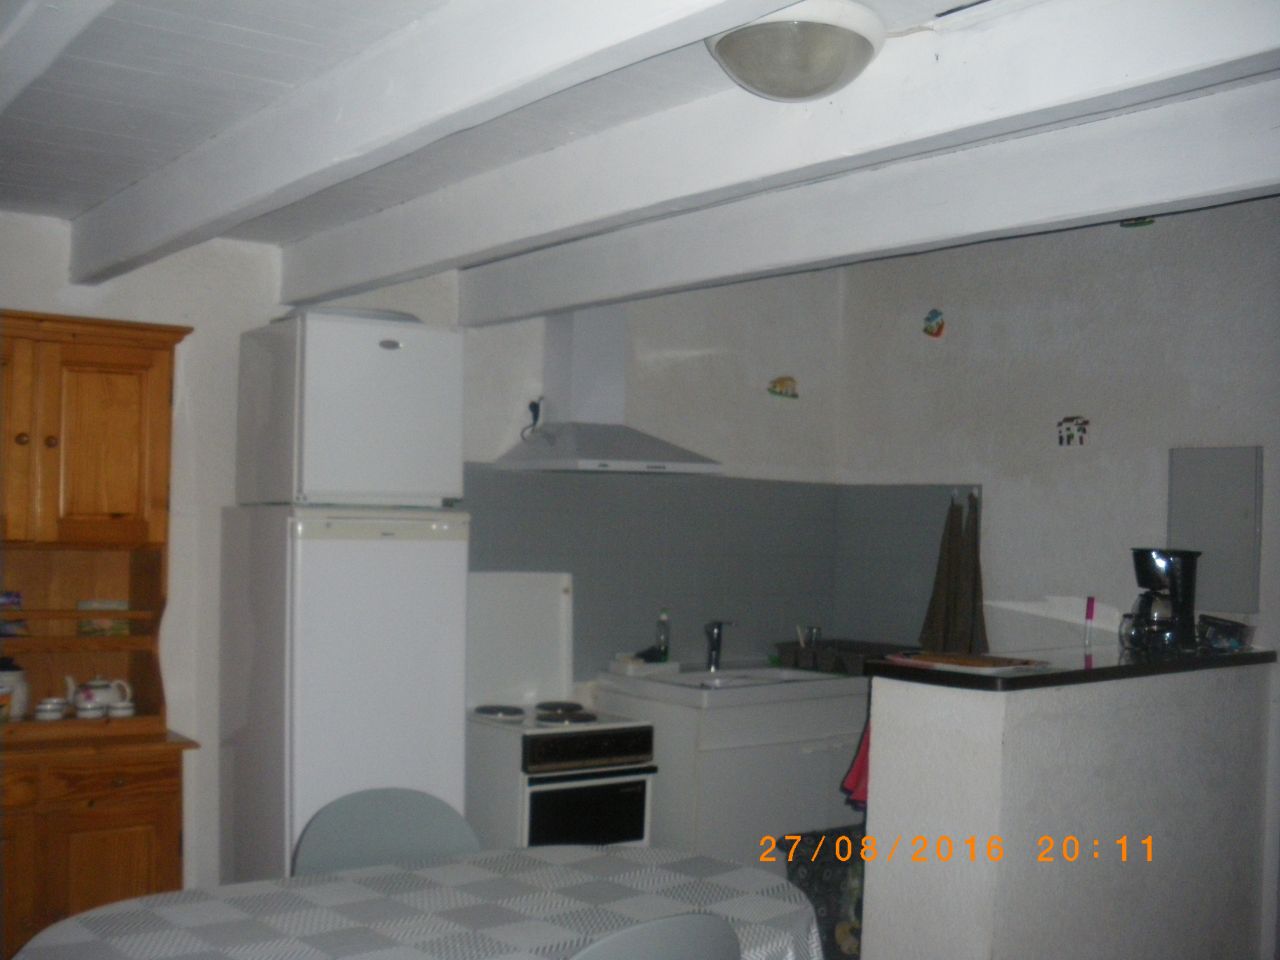 Location appartement Le Baracrs N°2303 image 5